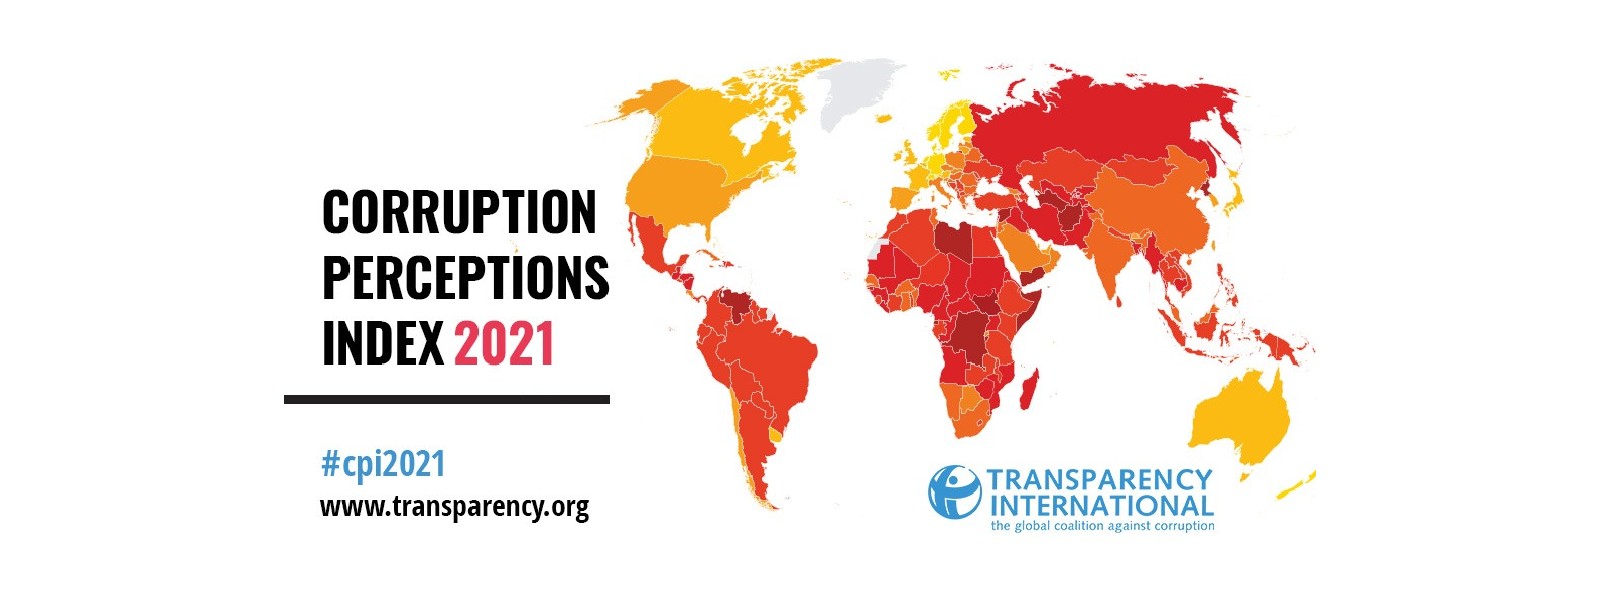 Sri Lanka drops from 94 to 102 in Corruption Perceptions Index